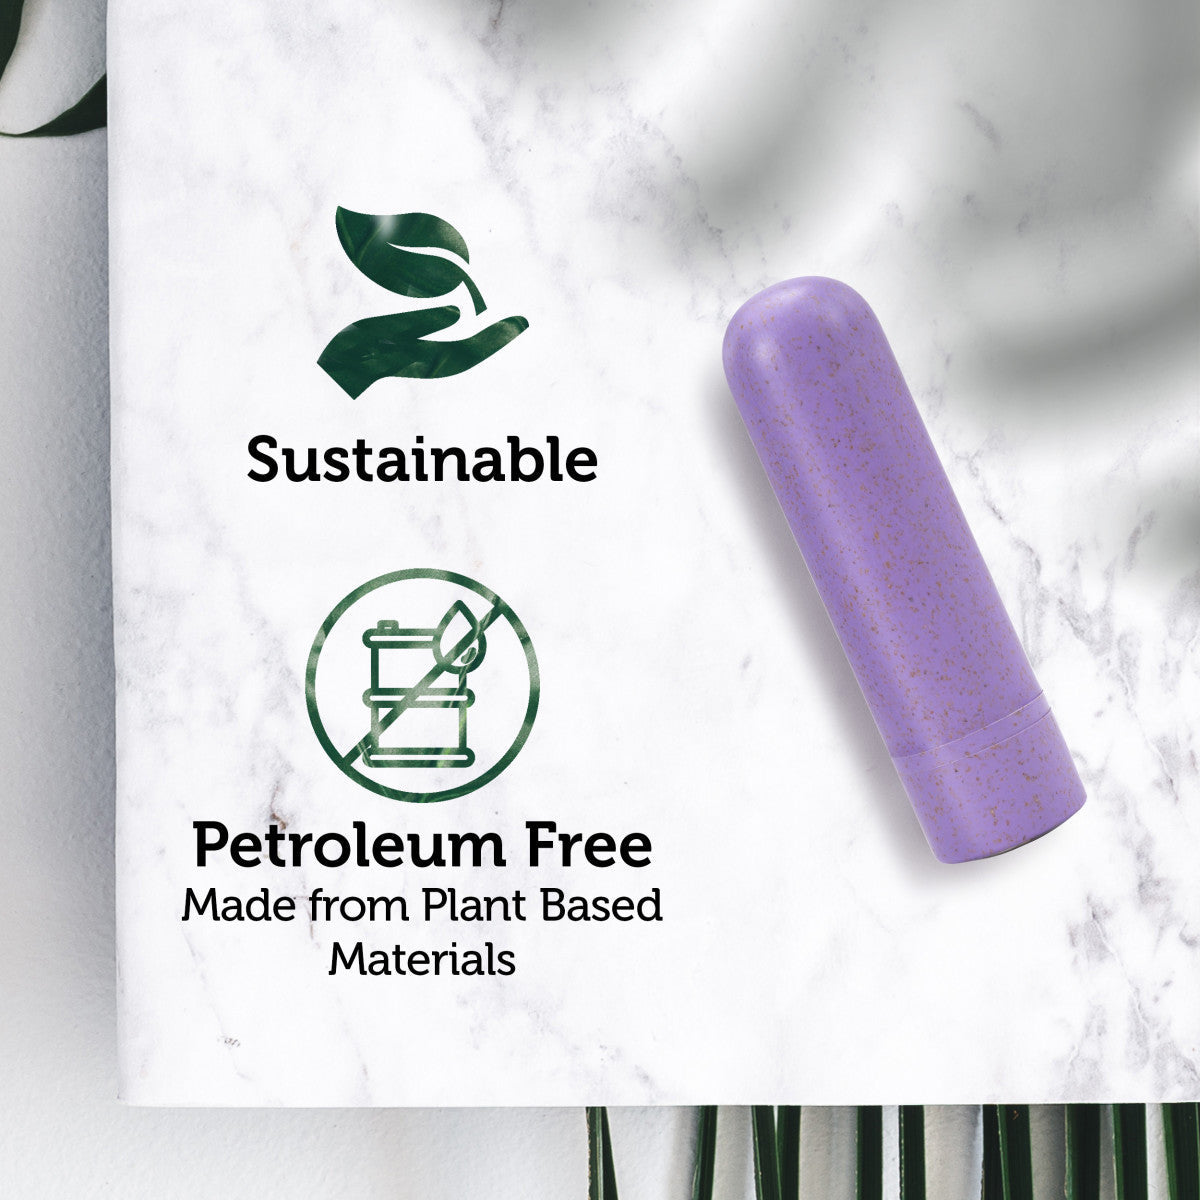 Gaia | Eco Rechargeable: Plant-Based 3" Smooth Multispeed Bullet Vibrator in Purple - 淡紫色植物基 3 英寸平滑多速子彈頭振動器